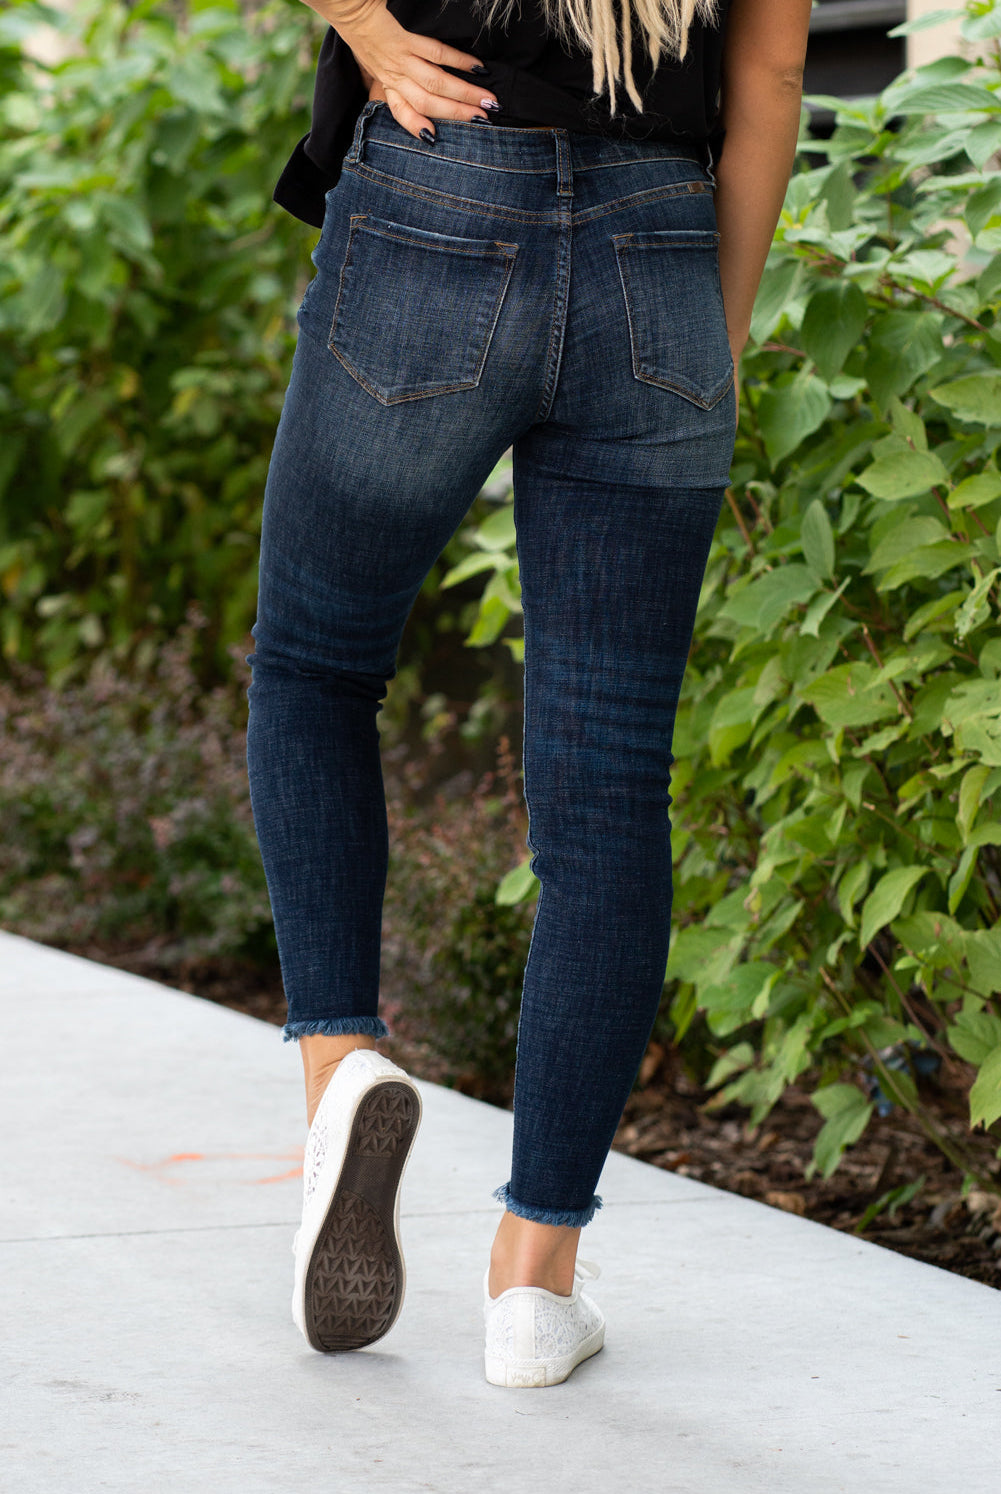 KanCan Jeans  Collection: Core Style Color: Dark Wash, 91.9% Cotton 7% Polyester 1.1% Spandex Cut: Ankle Skinny, 27.5" Inseam Rise: High-Rise, 9.5" Front Rise Machine Wash Separately In Cold Water Stitching: Classic Fly: Zipper Style #: KC7274D Contact us for any additional measurements or sizing.